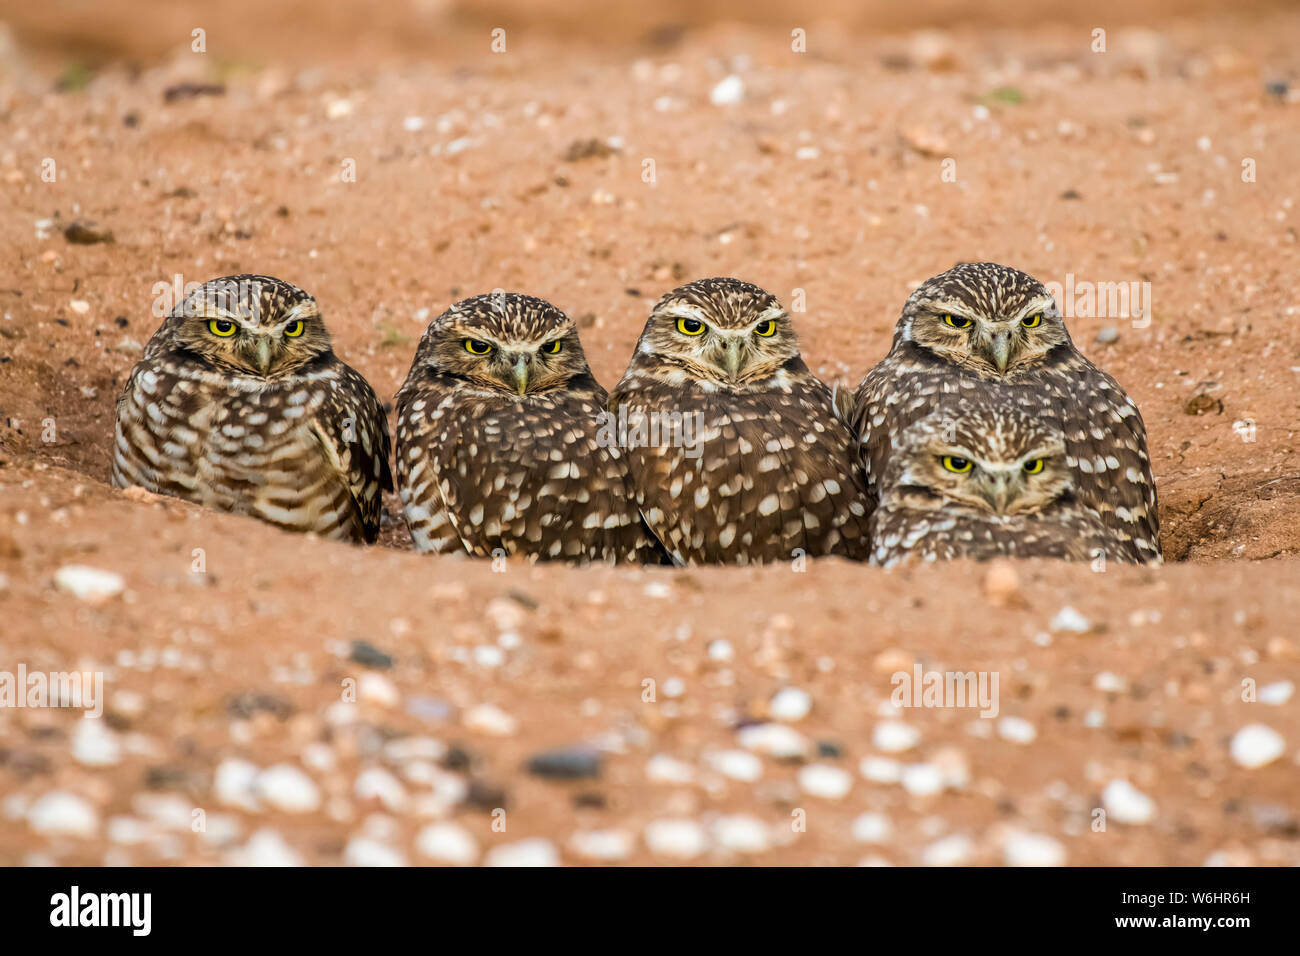 Four Burrowing Owls (Athene cunicularia), peering from the entrance to their burrow; Casa Grande, Arizona, United States of America Stock Photo